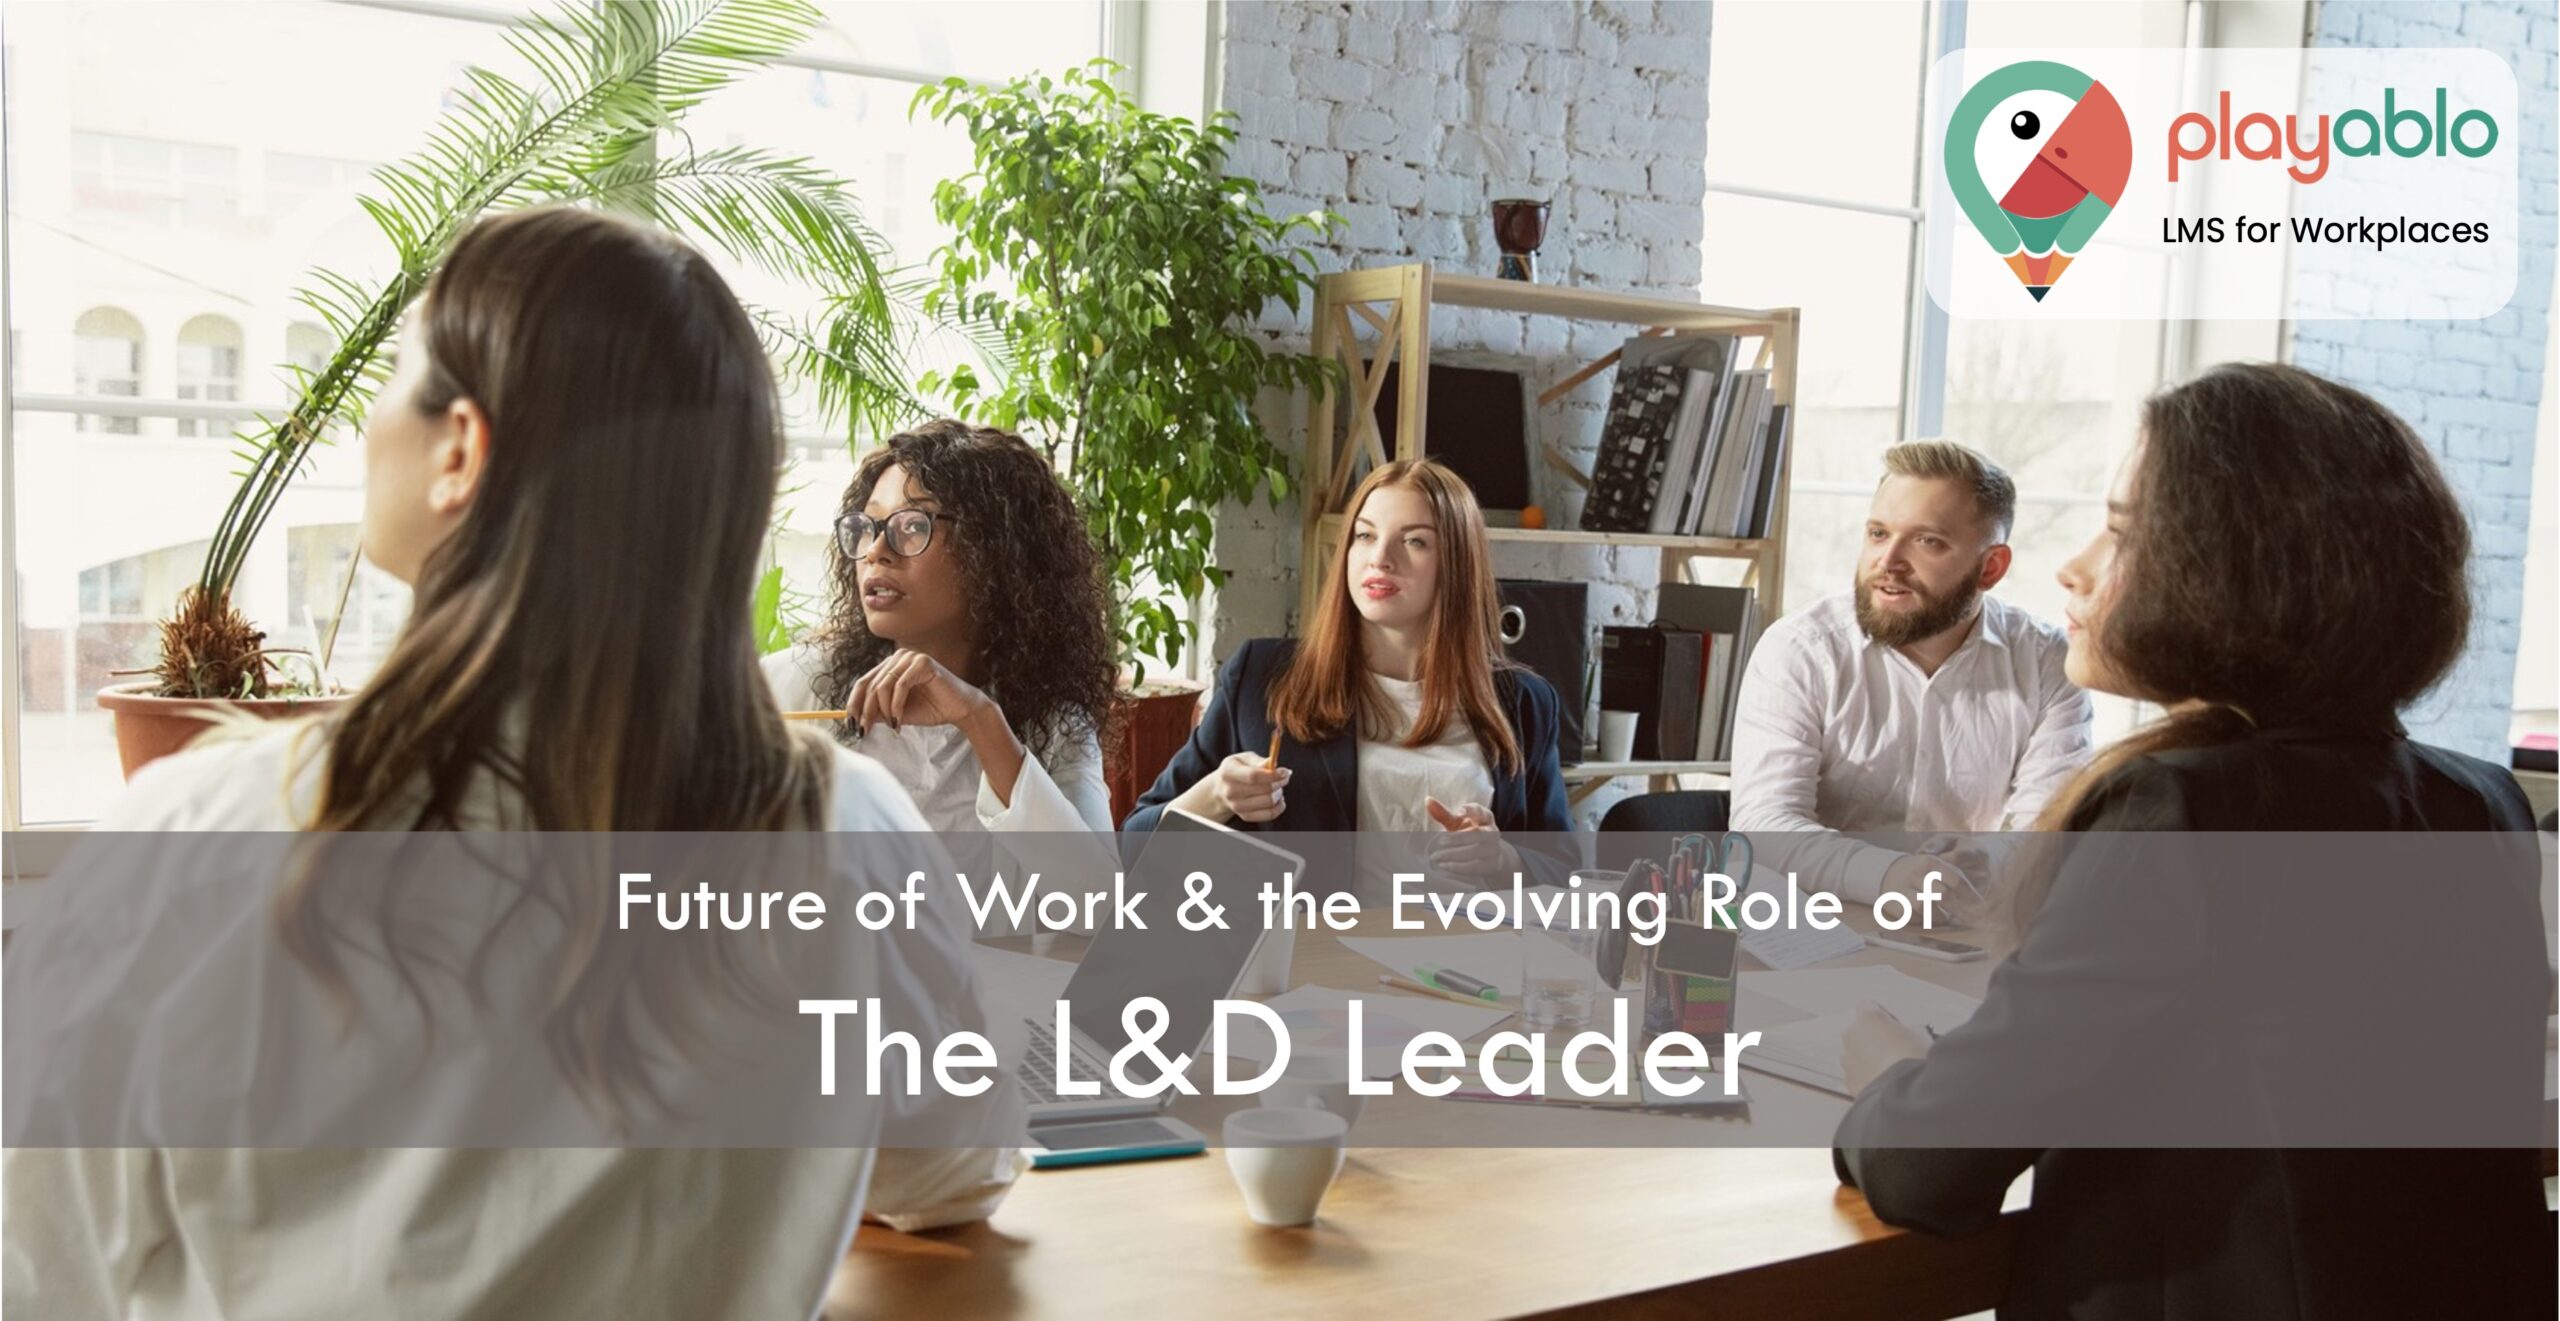 evolving role of the L&D leader